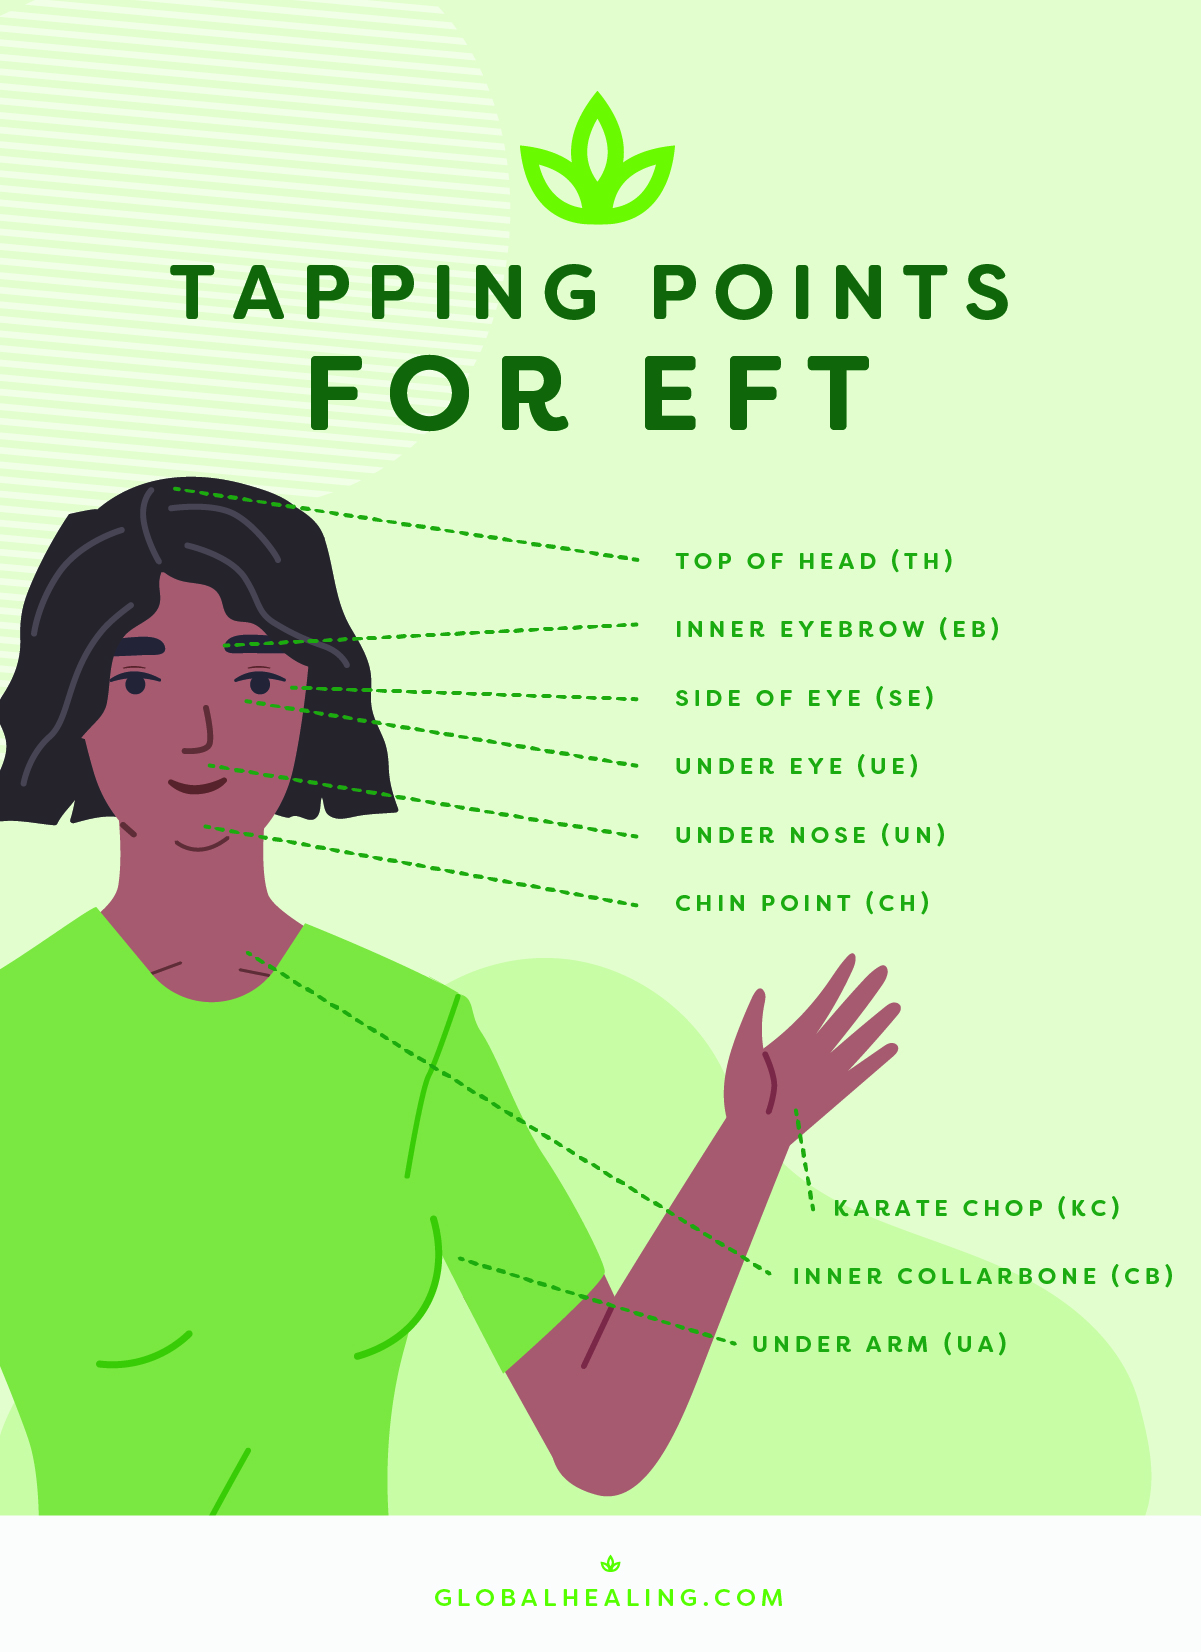 An illustrated infographic of a woman referencing various tapping points related to Emotional Freedom Techniques.